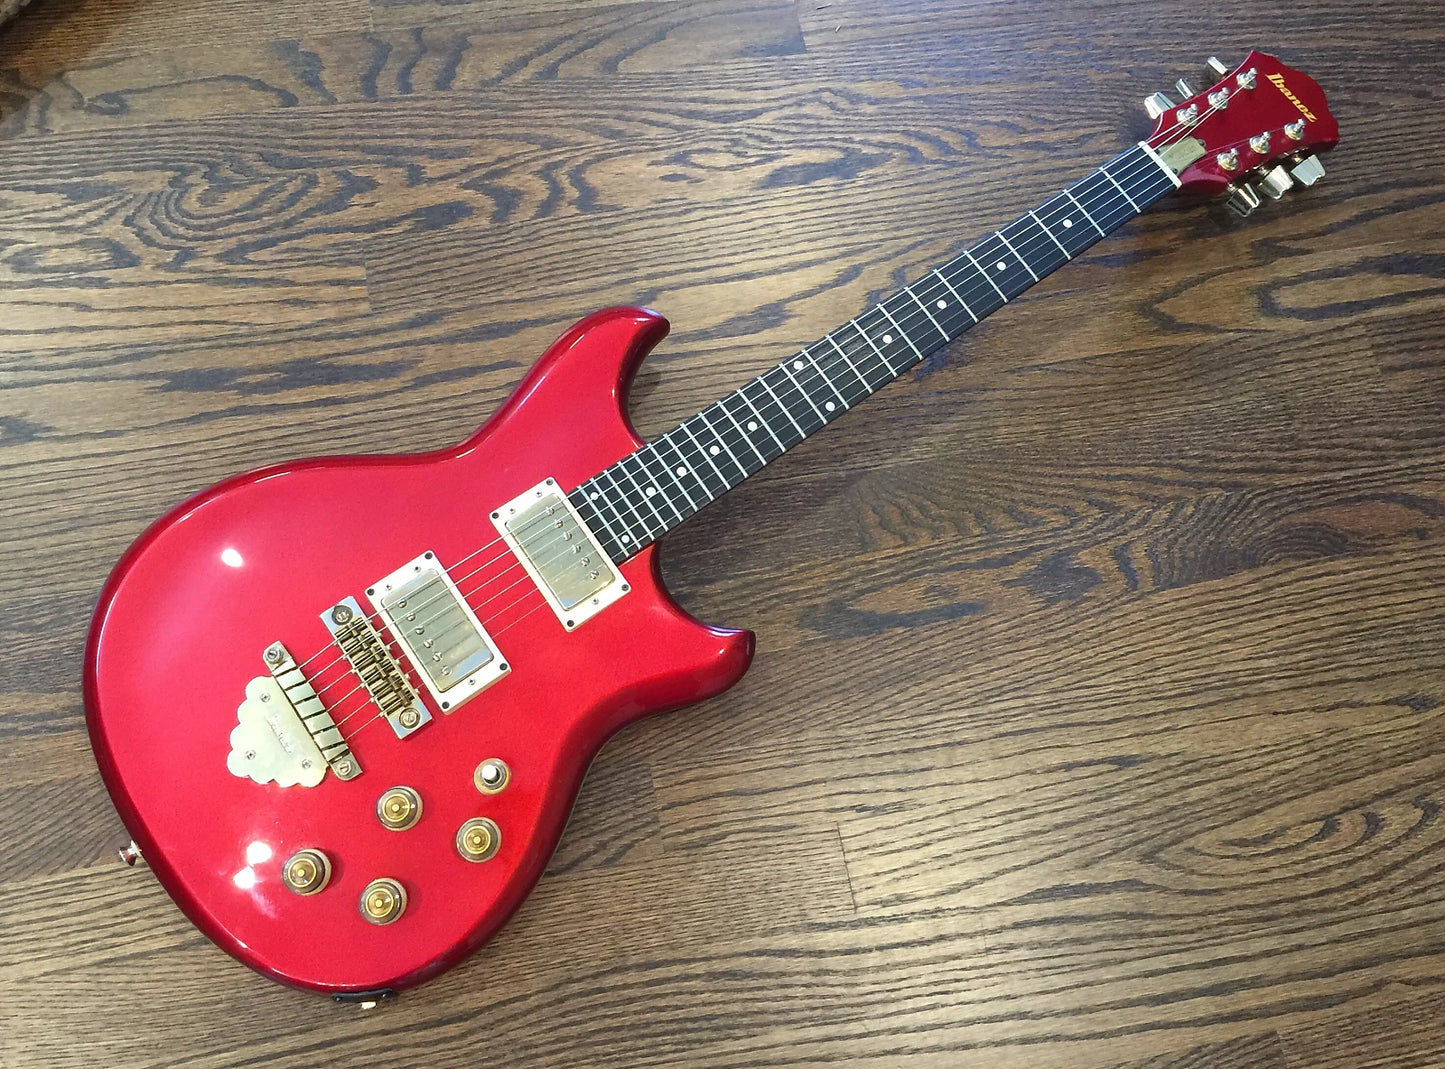 Ibanez Musician Series MC150 Fire Red - 1982 - Excellent Condition